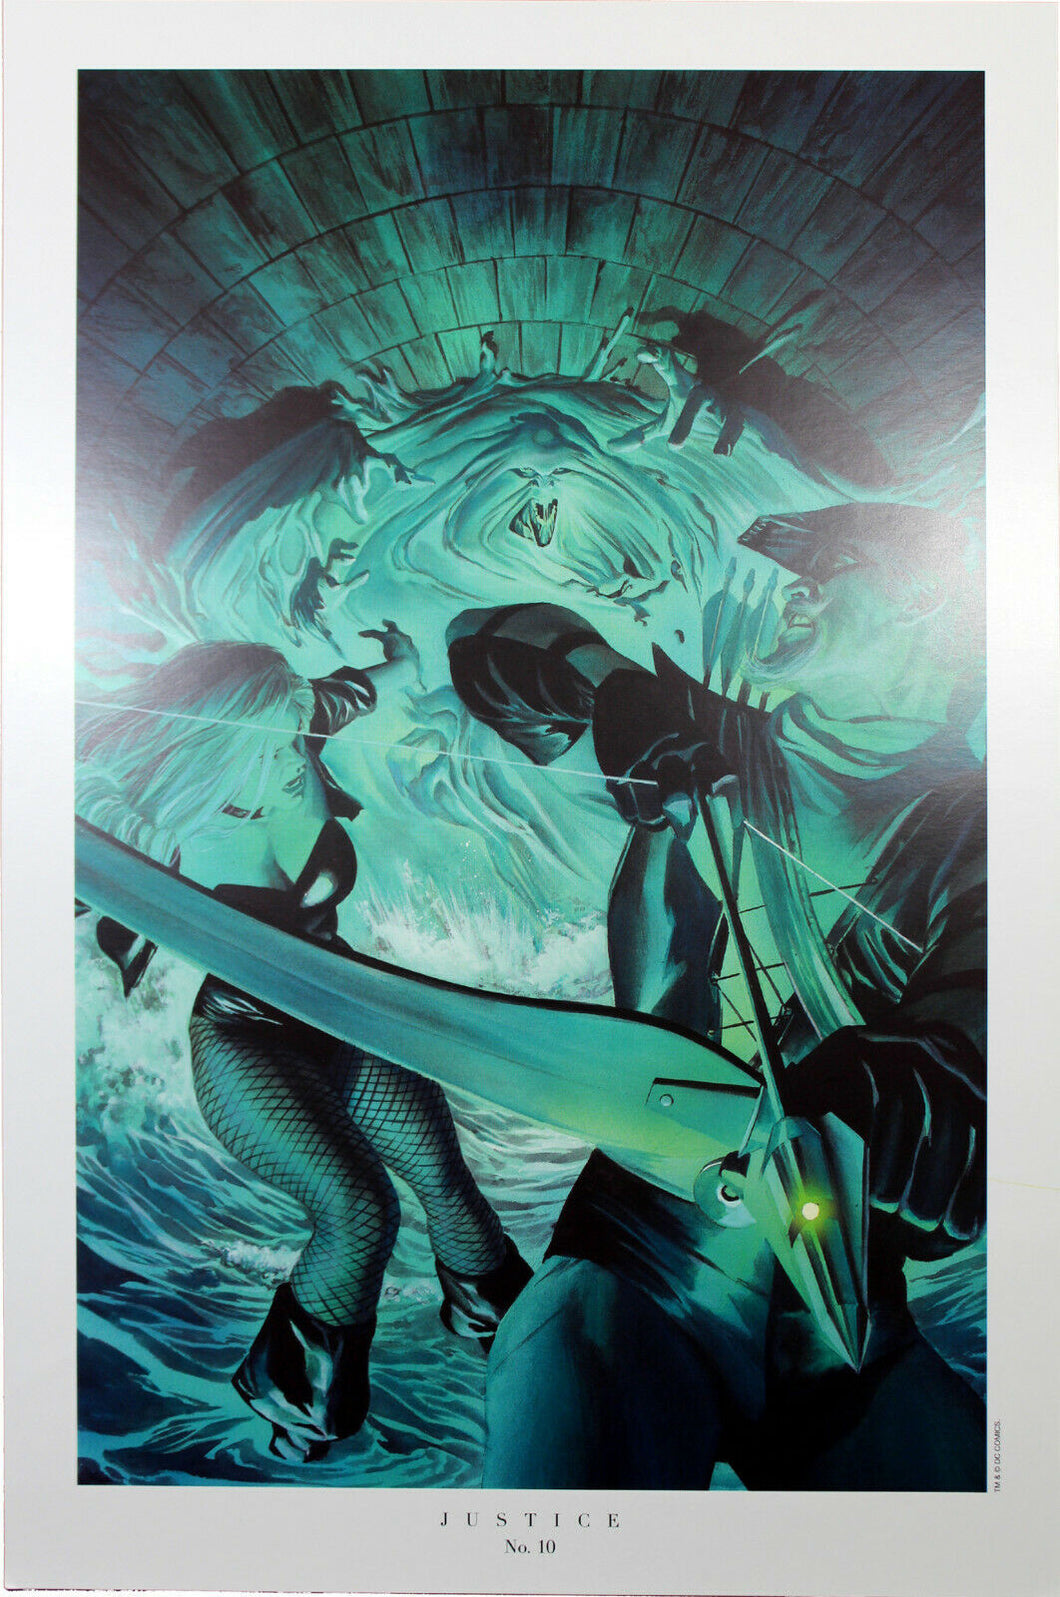 JUSTICE #10 ART PRINT by Alex Ross ~ 9